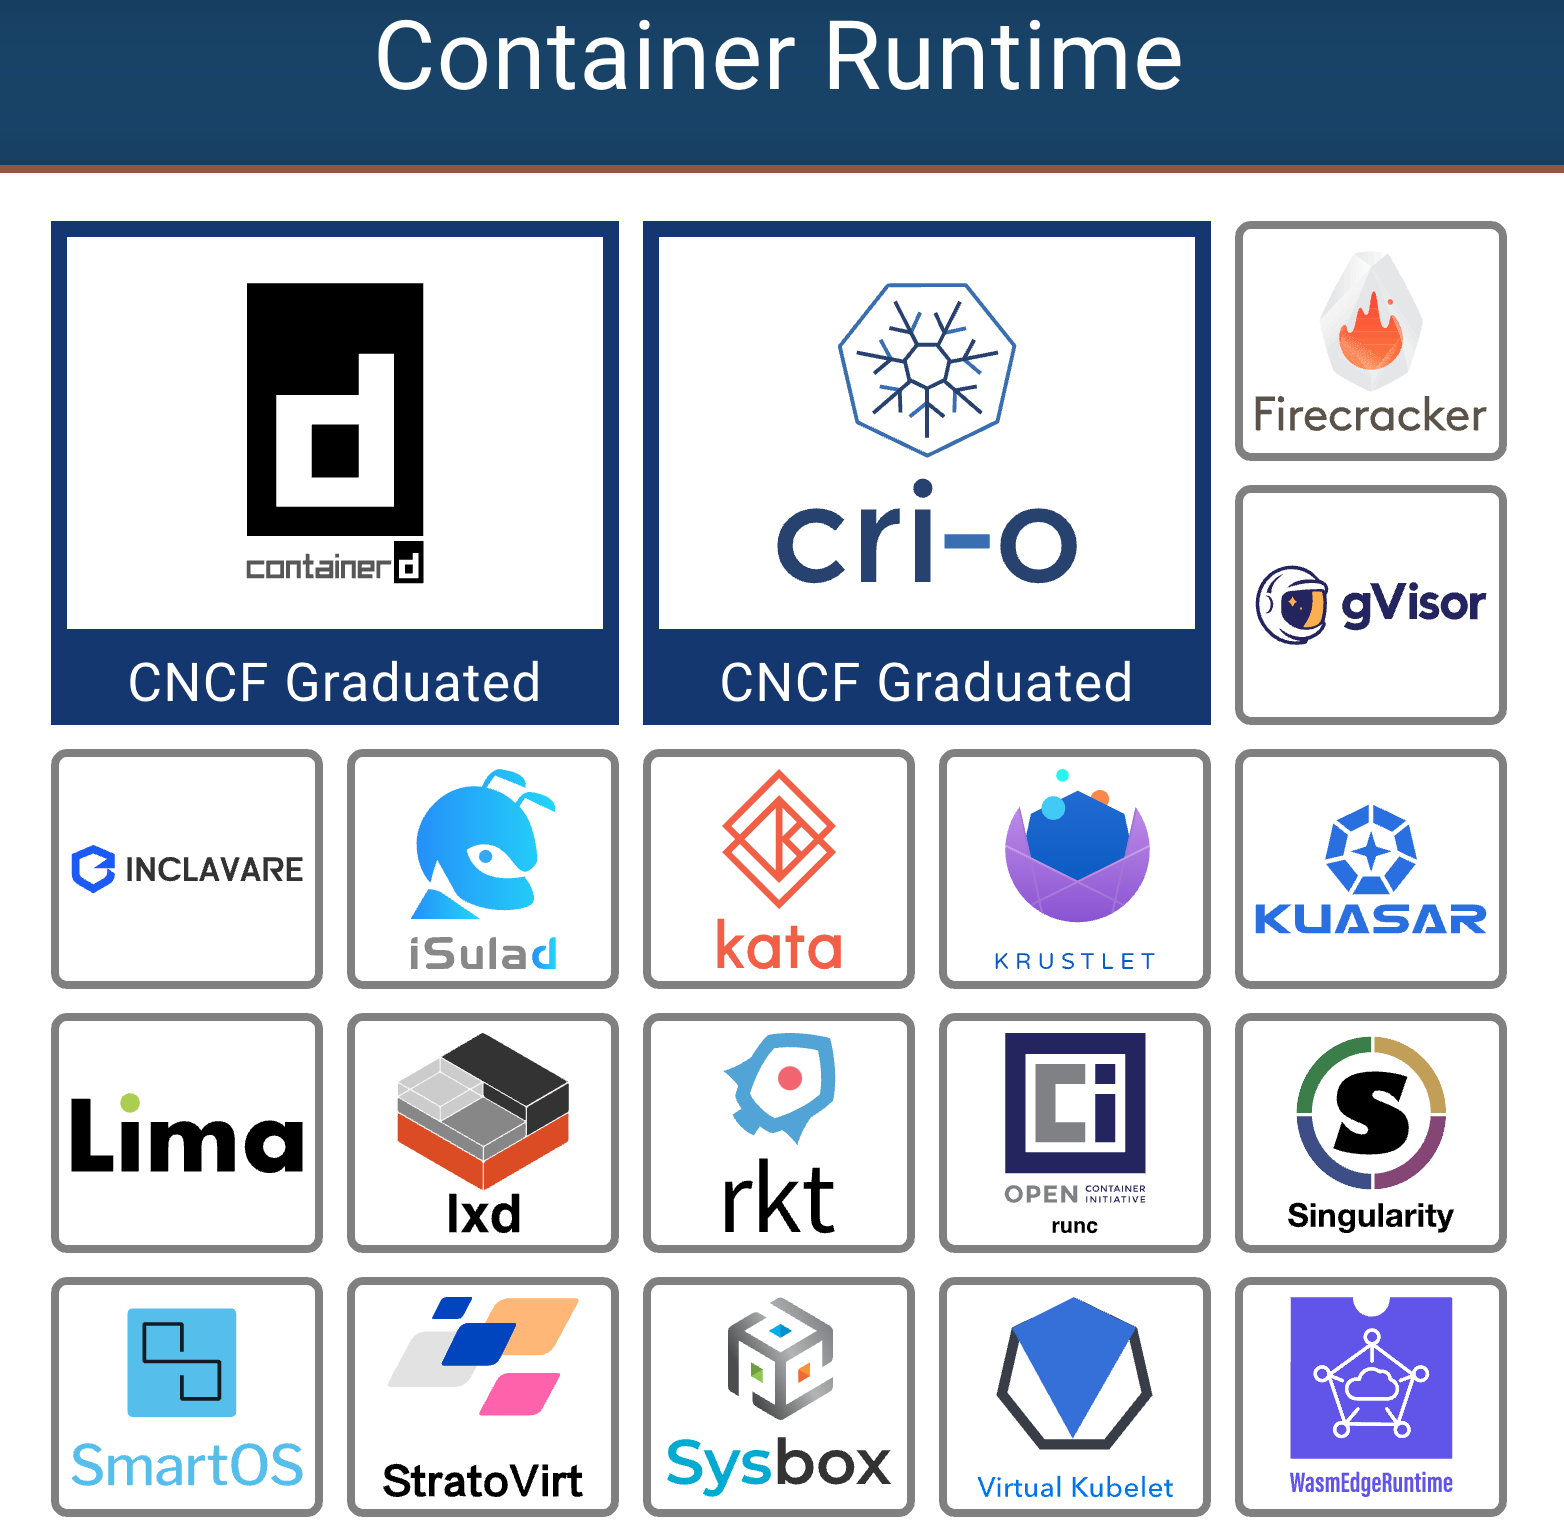 cncf-landscape-container-runtime